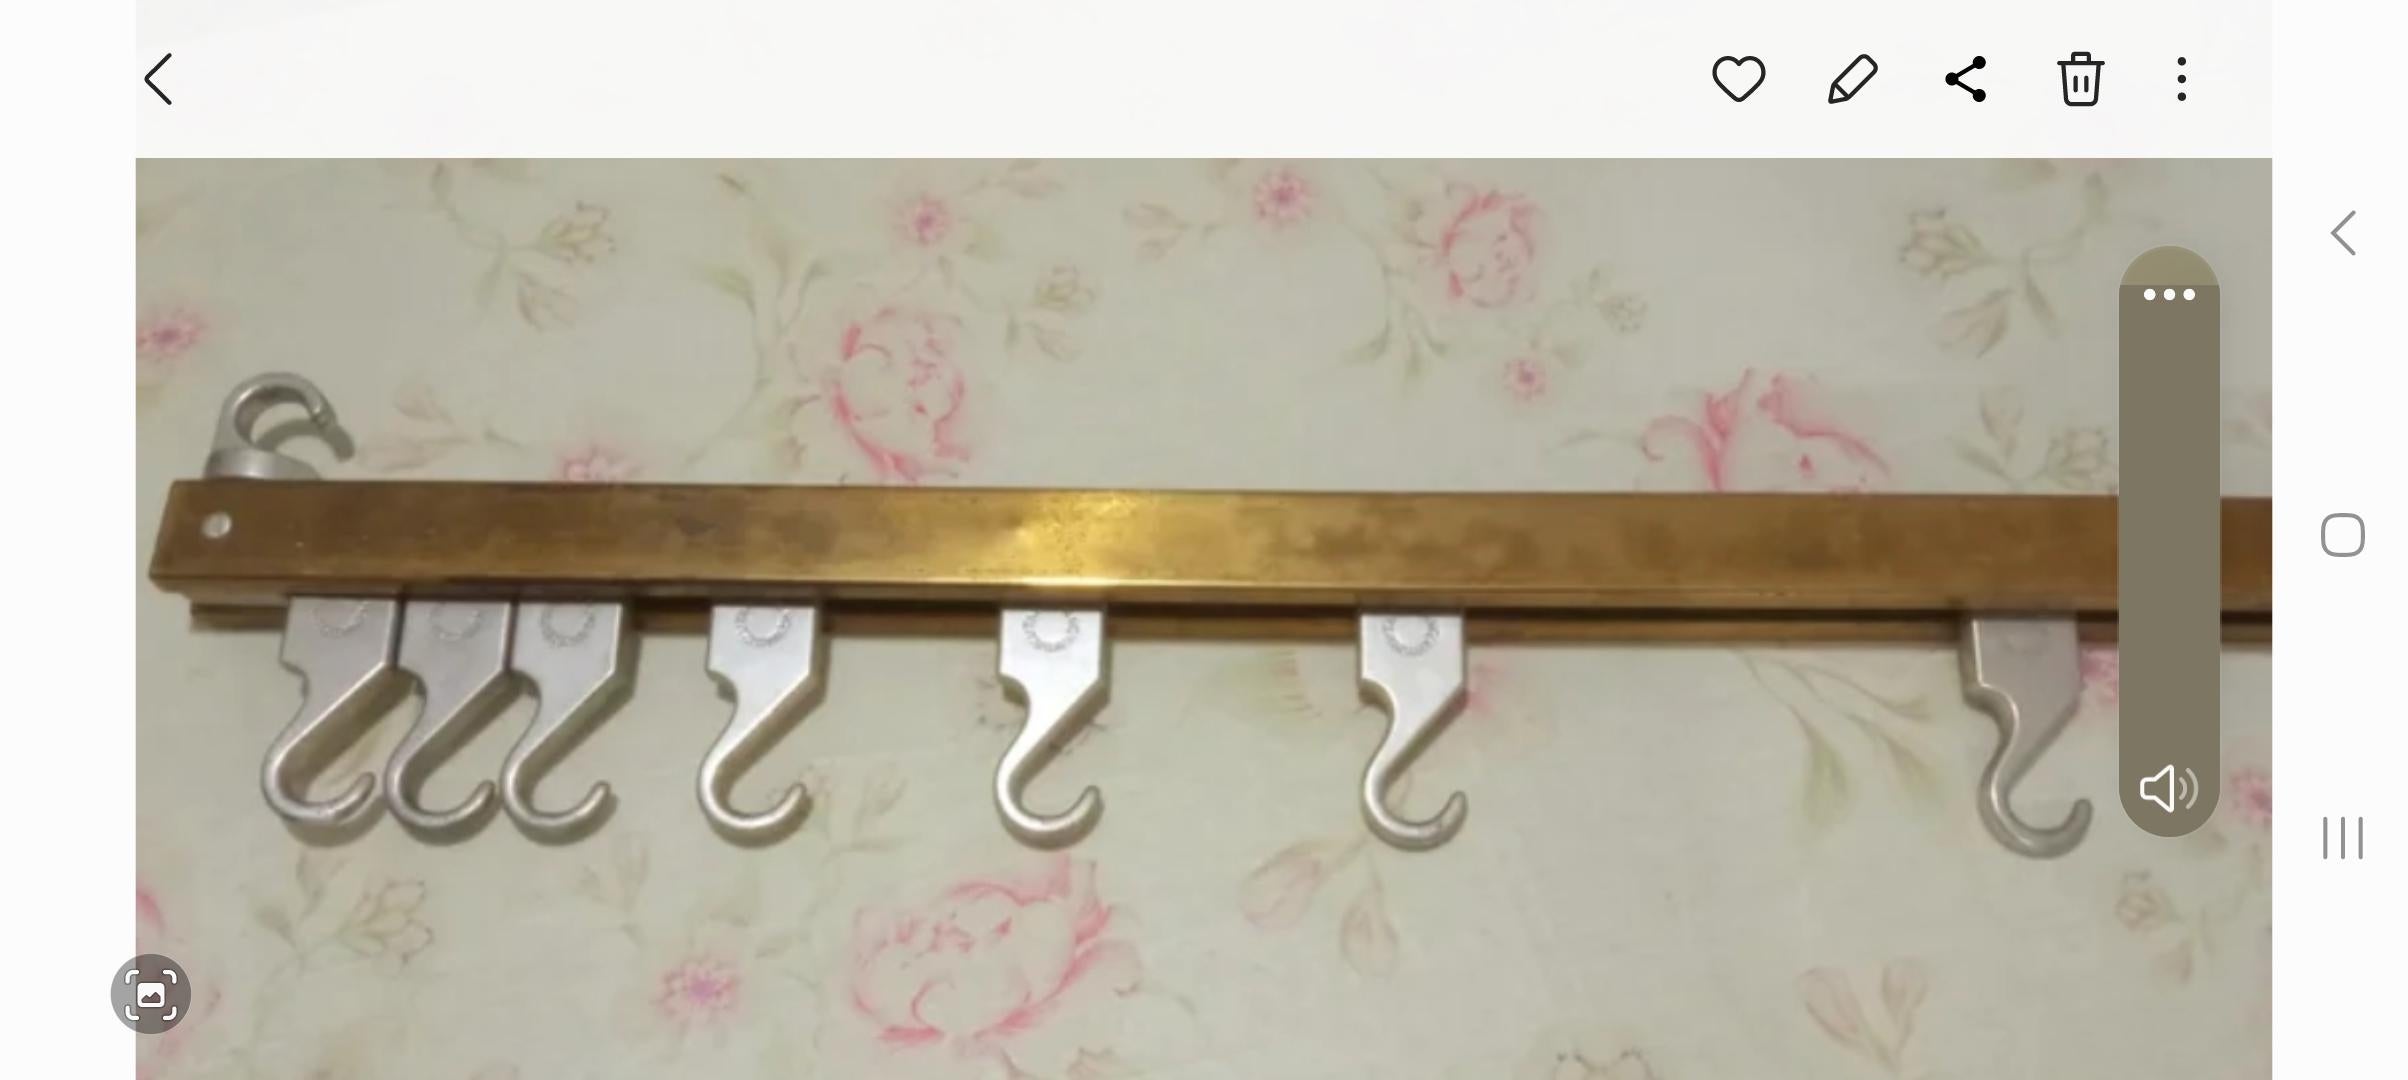 Butcher Hanger  Brass and Steel Whit 7 Movable Hooks.Industrial  Large Size 92cm 3